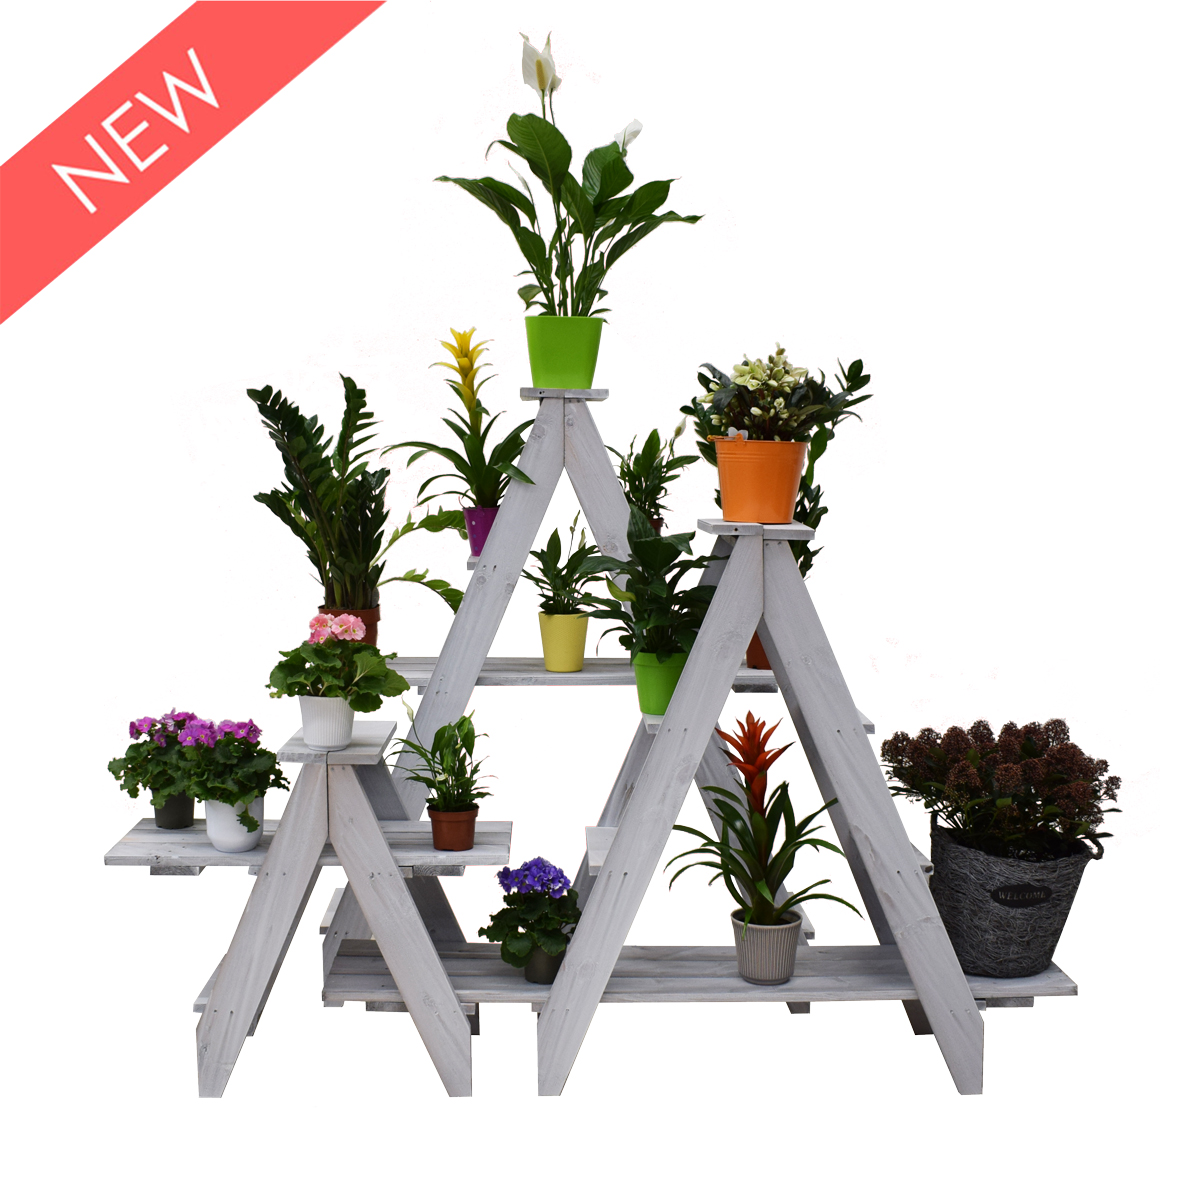 Ladders for plants and flowers